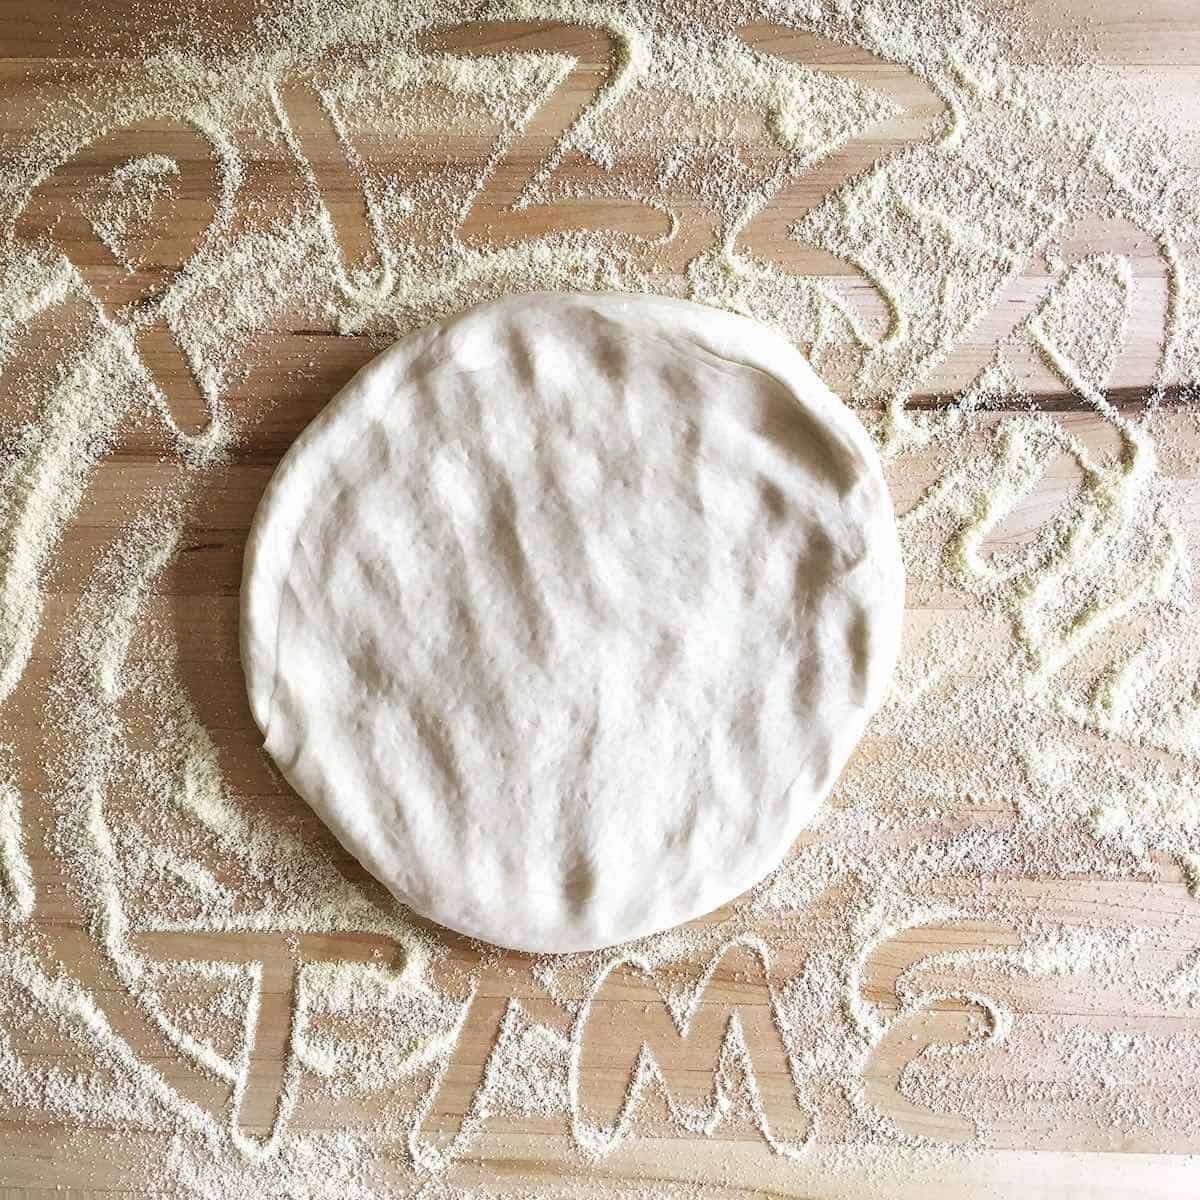 Pizza time written on cornmeal board with some pizza dough.